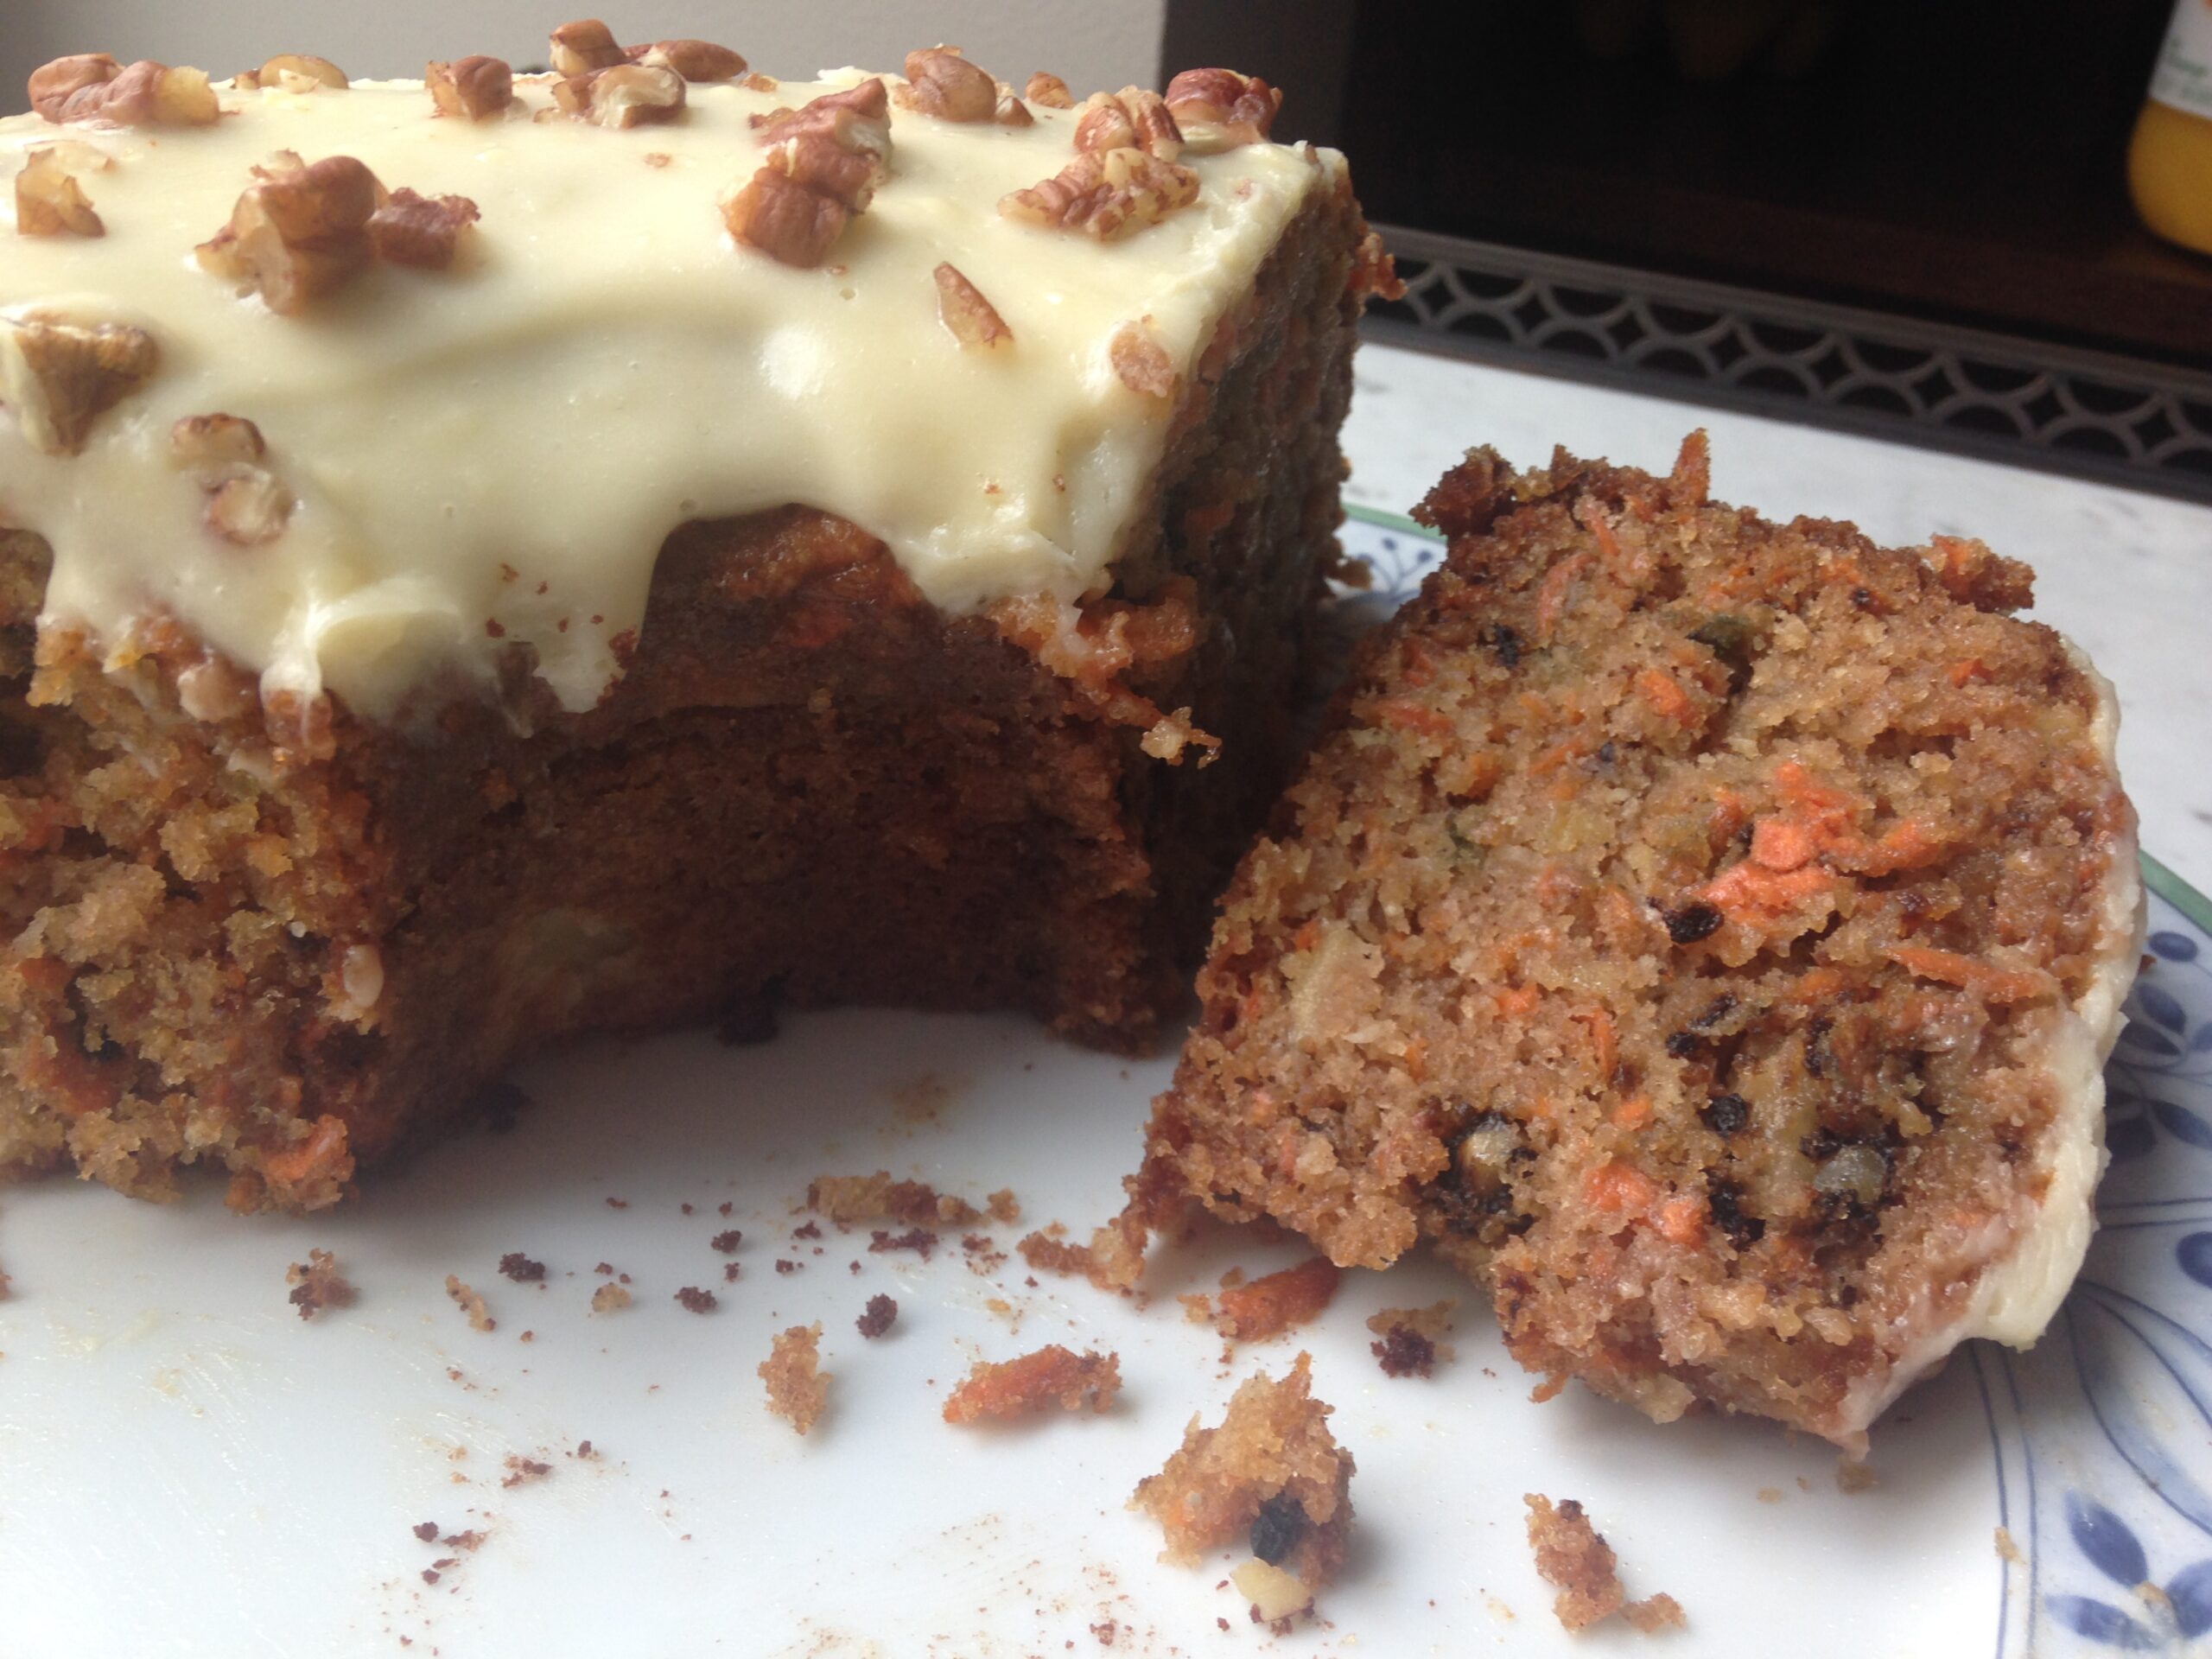 Week Four: Carrot cake! (and other less sinful temptations)